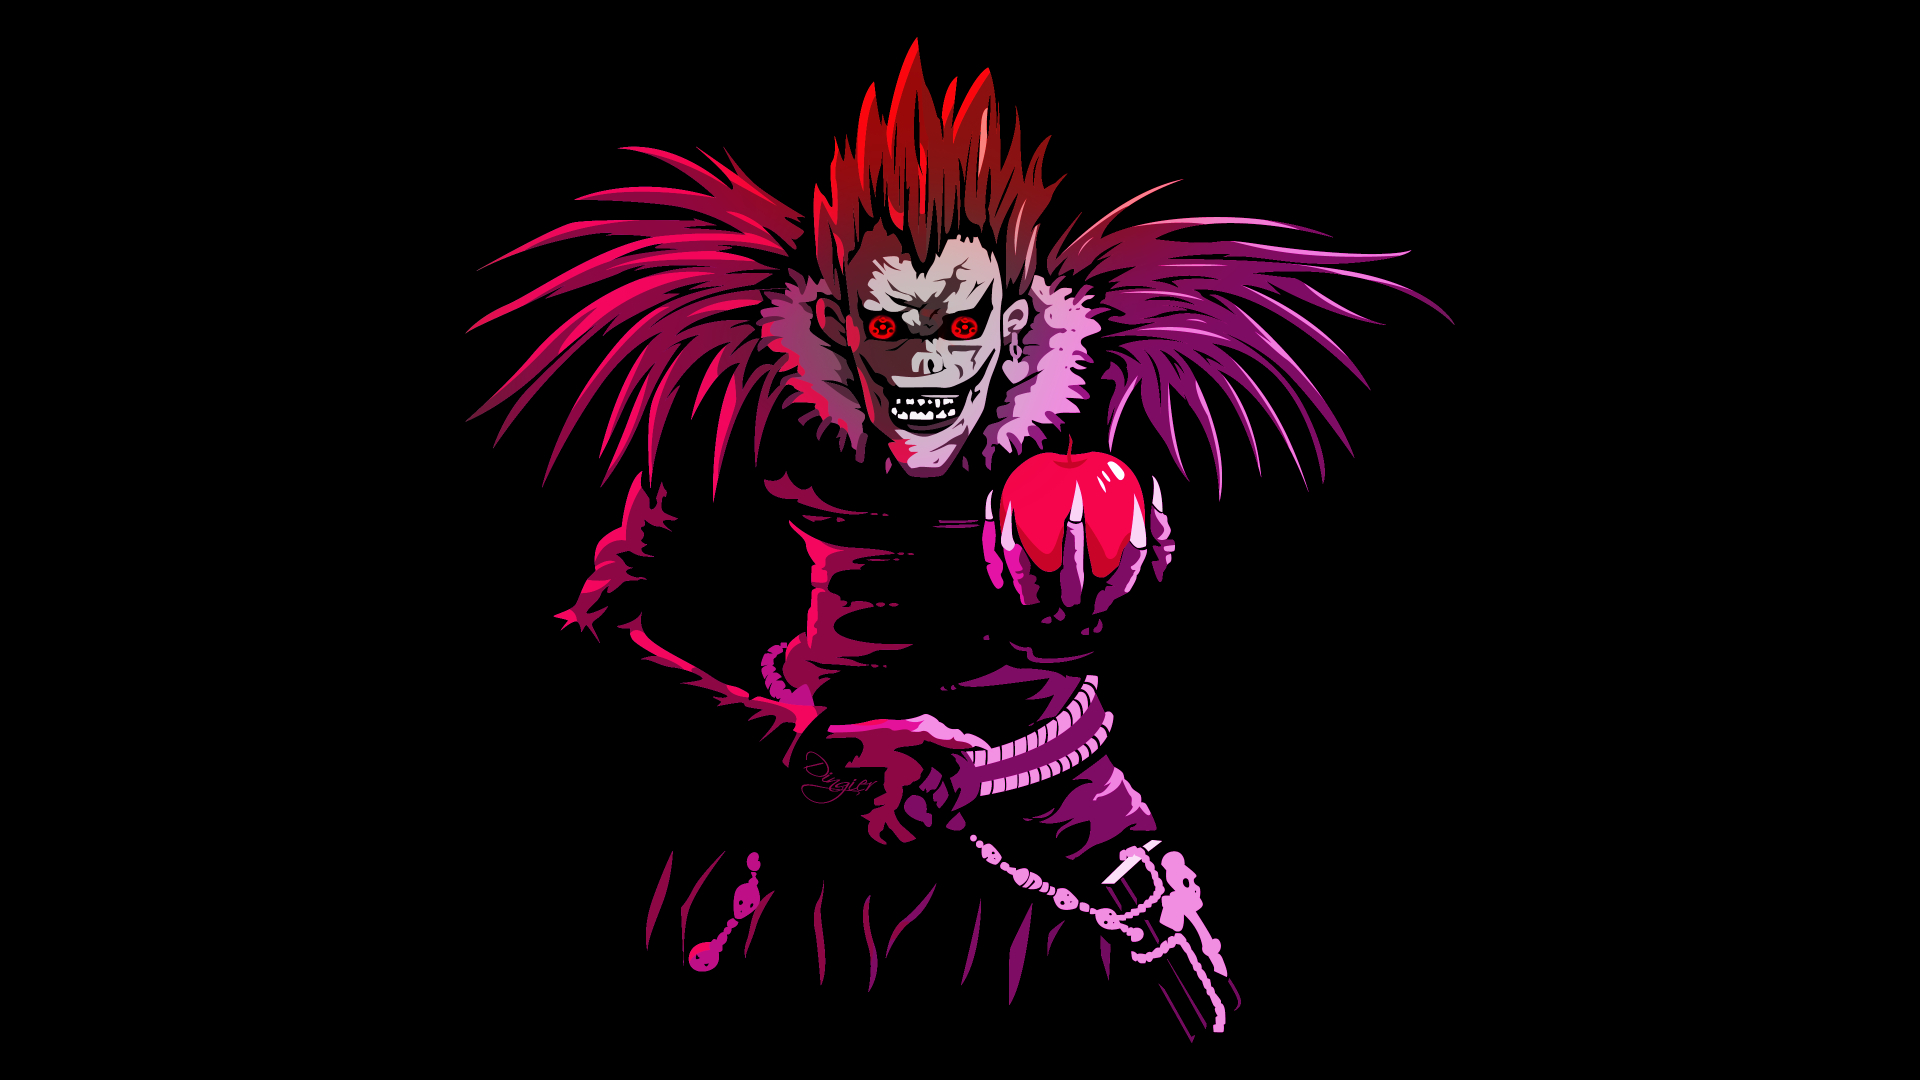 19x1080 Ryuk Death Note Cool 1080p Laptop Full Hd Wallpaper Hd Artist 4k Wallpapers Images Photos And Background Wallpapers Den